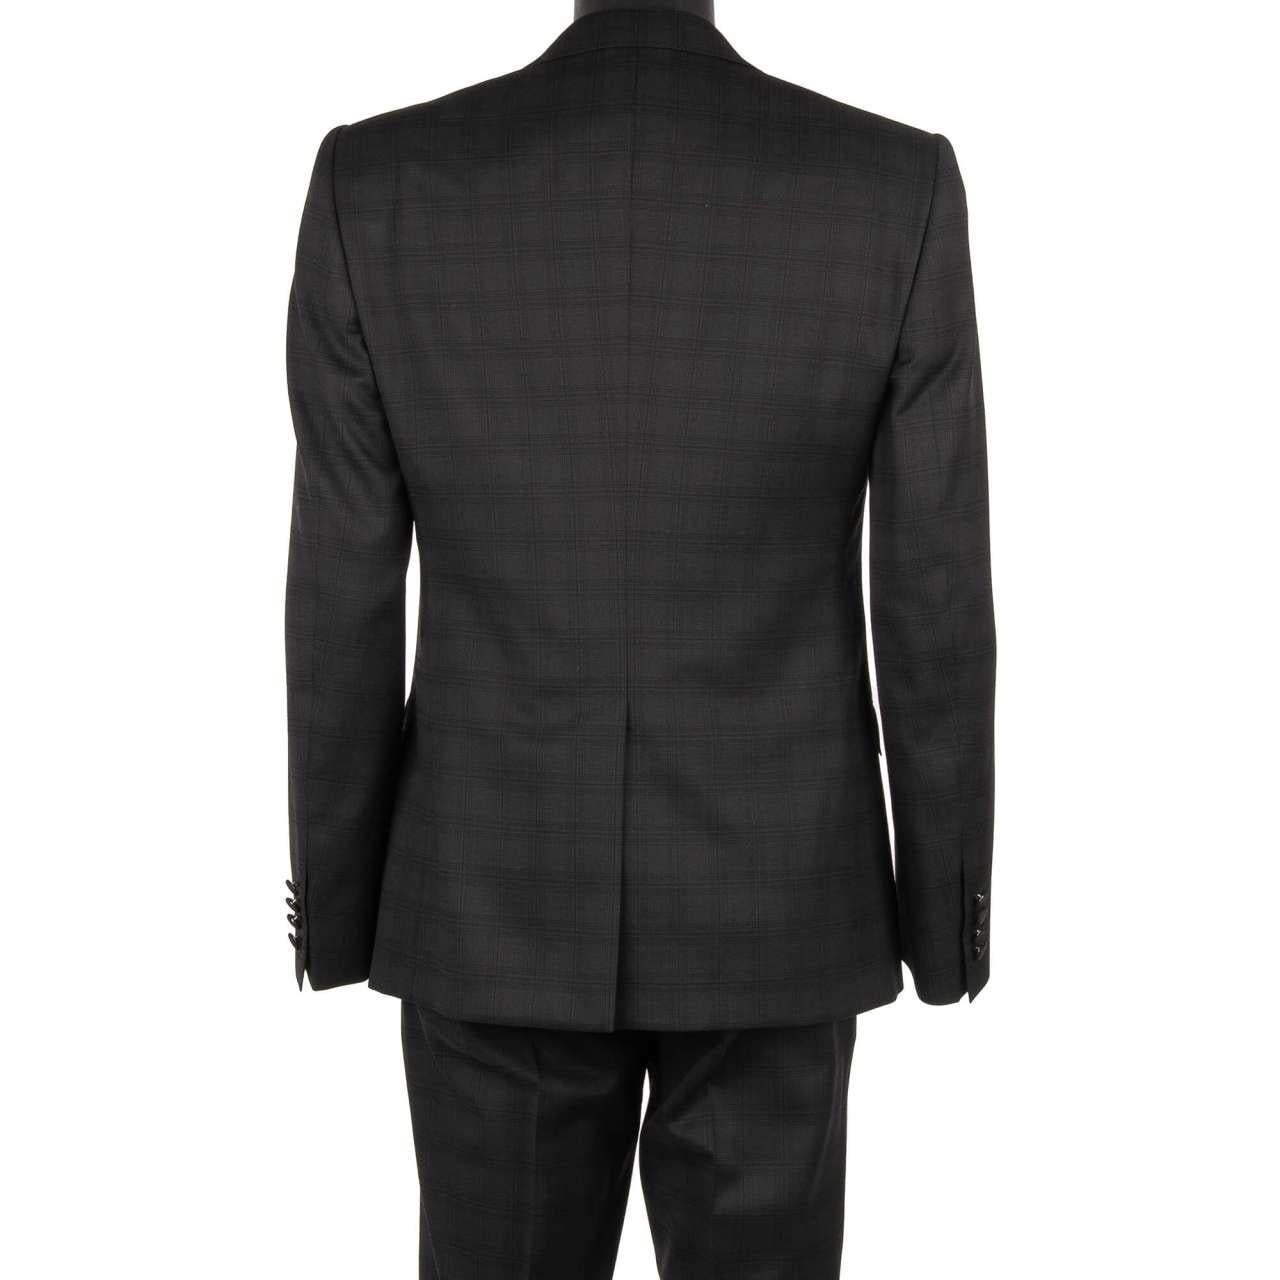 D&G 3 Piece Checked Suit Jacket Waistcoat Bee Brooch SICILIA Black 50 For Sale 2